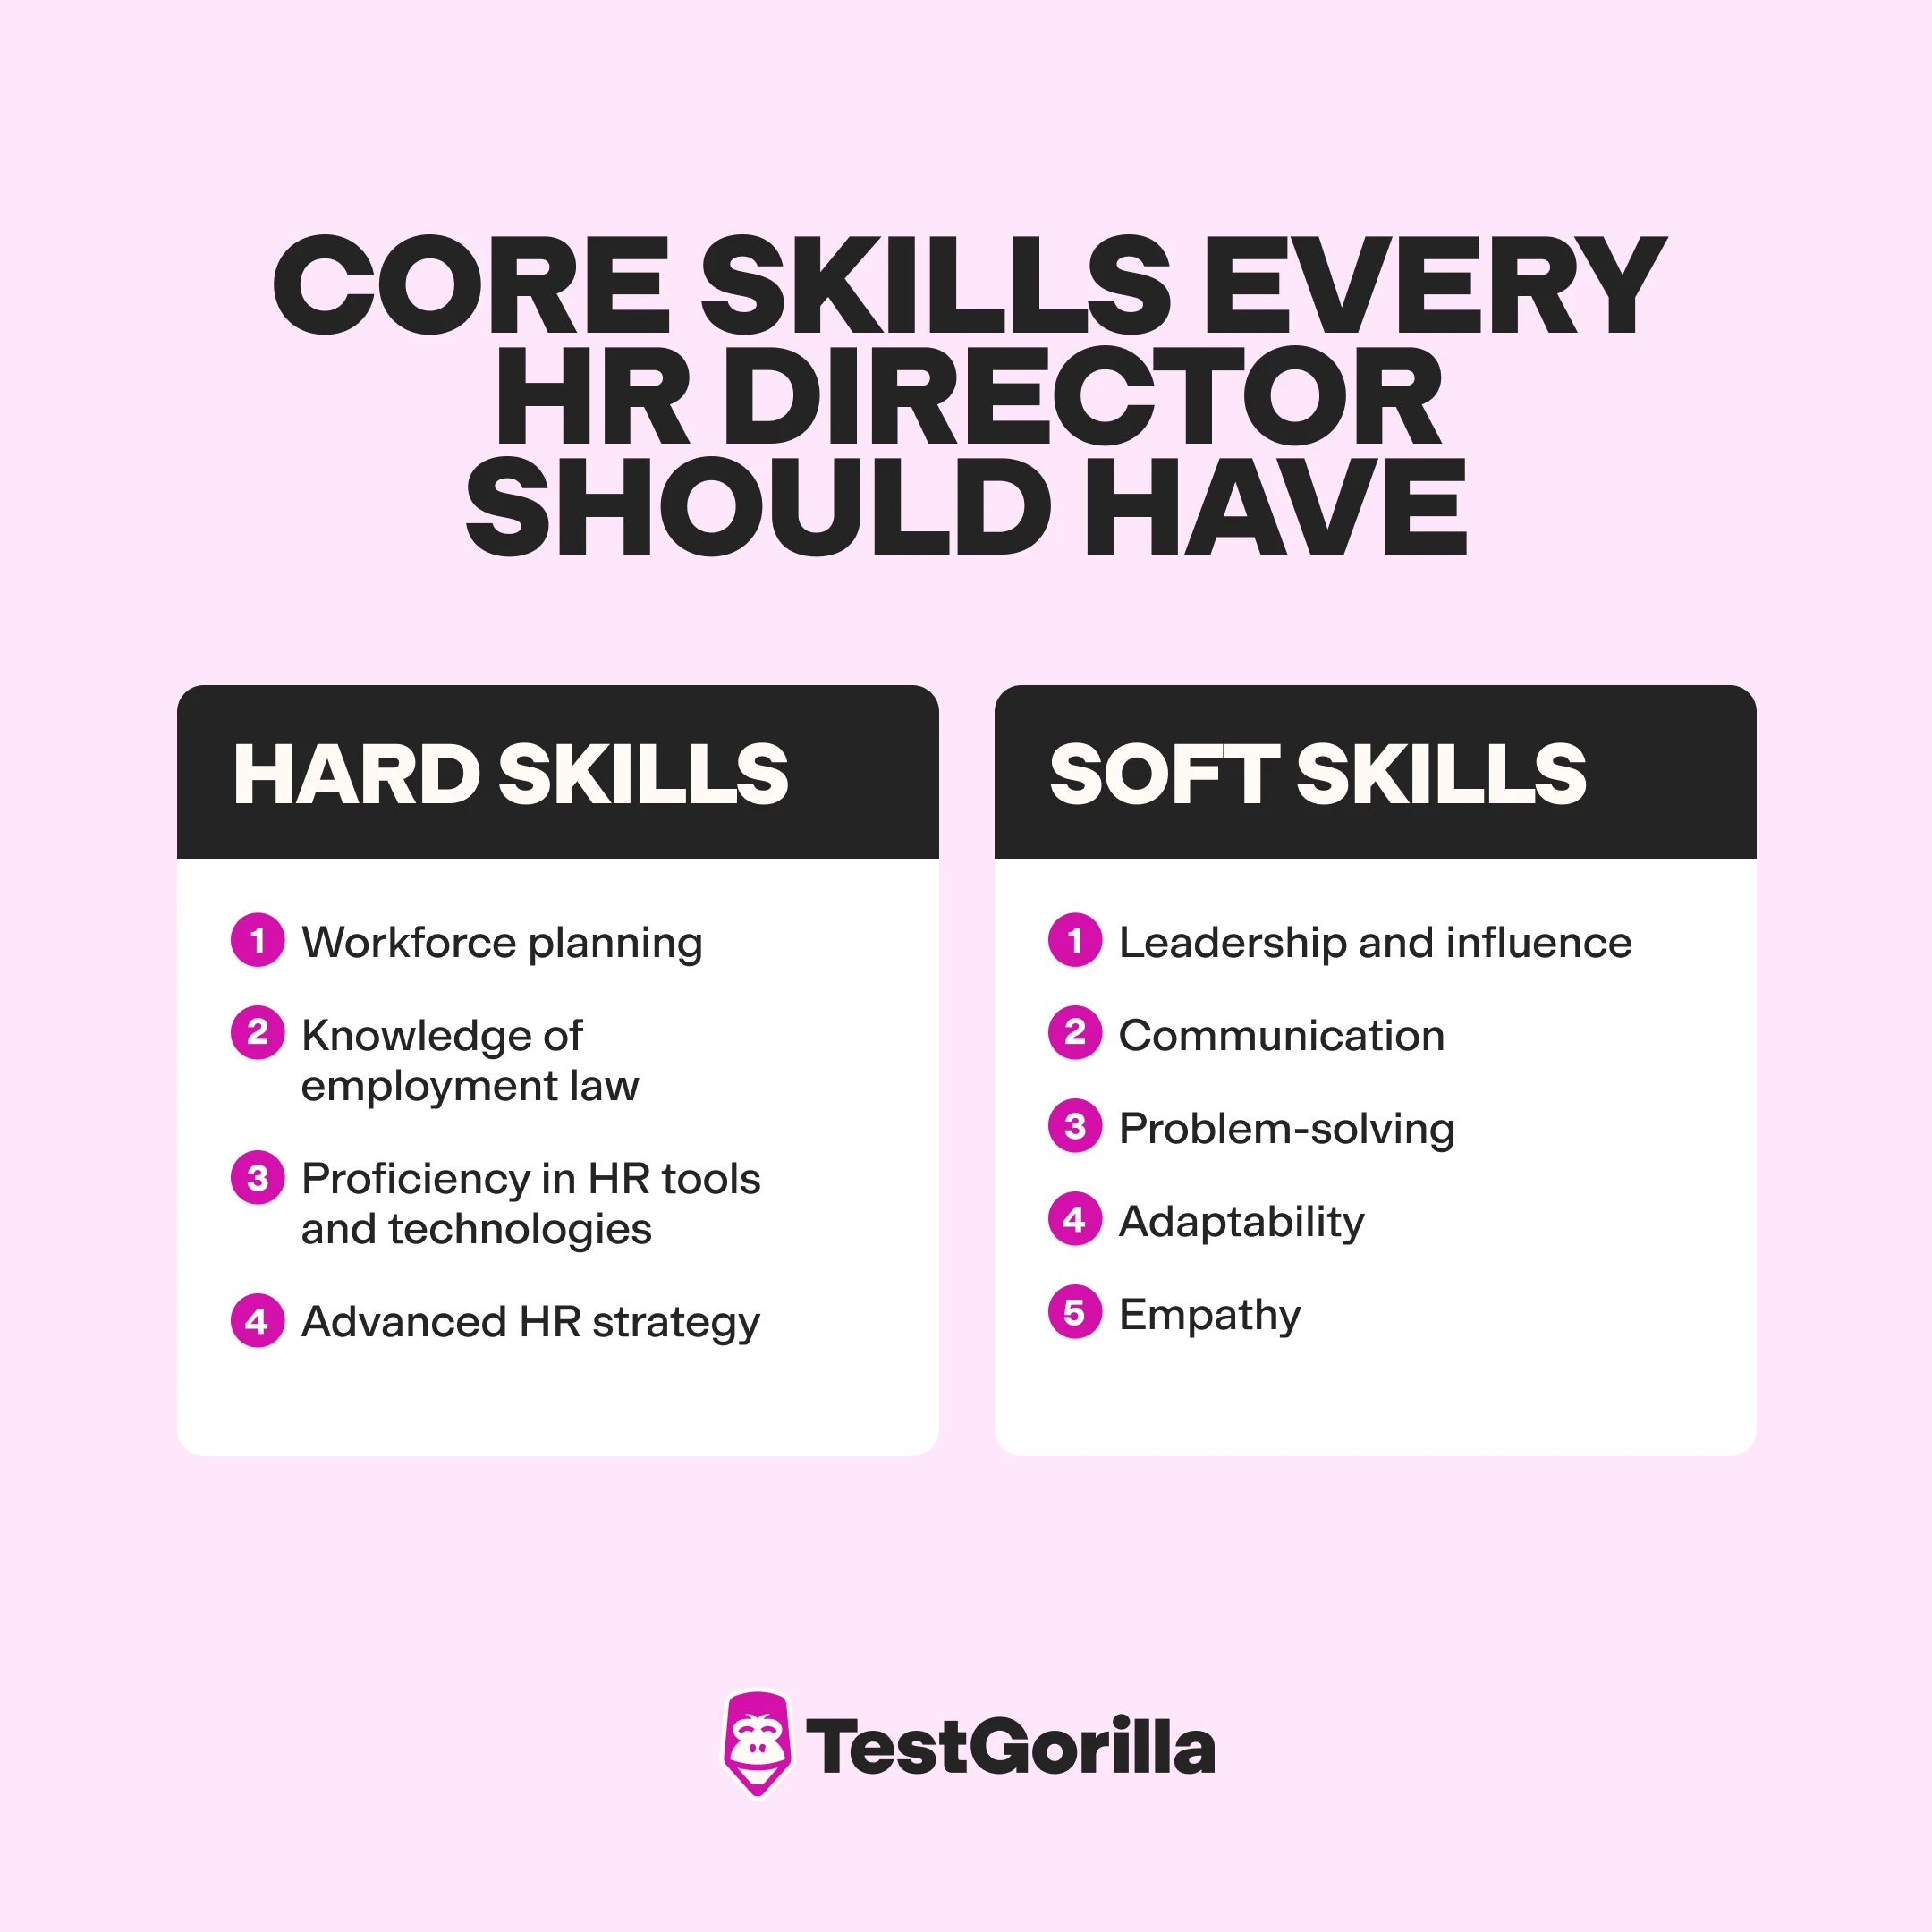 Core skills every HR director should have